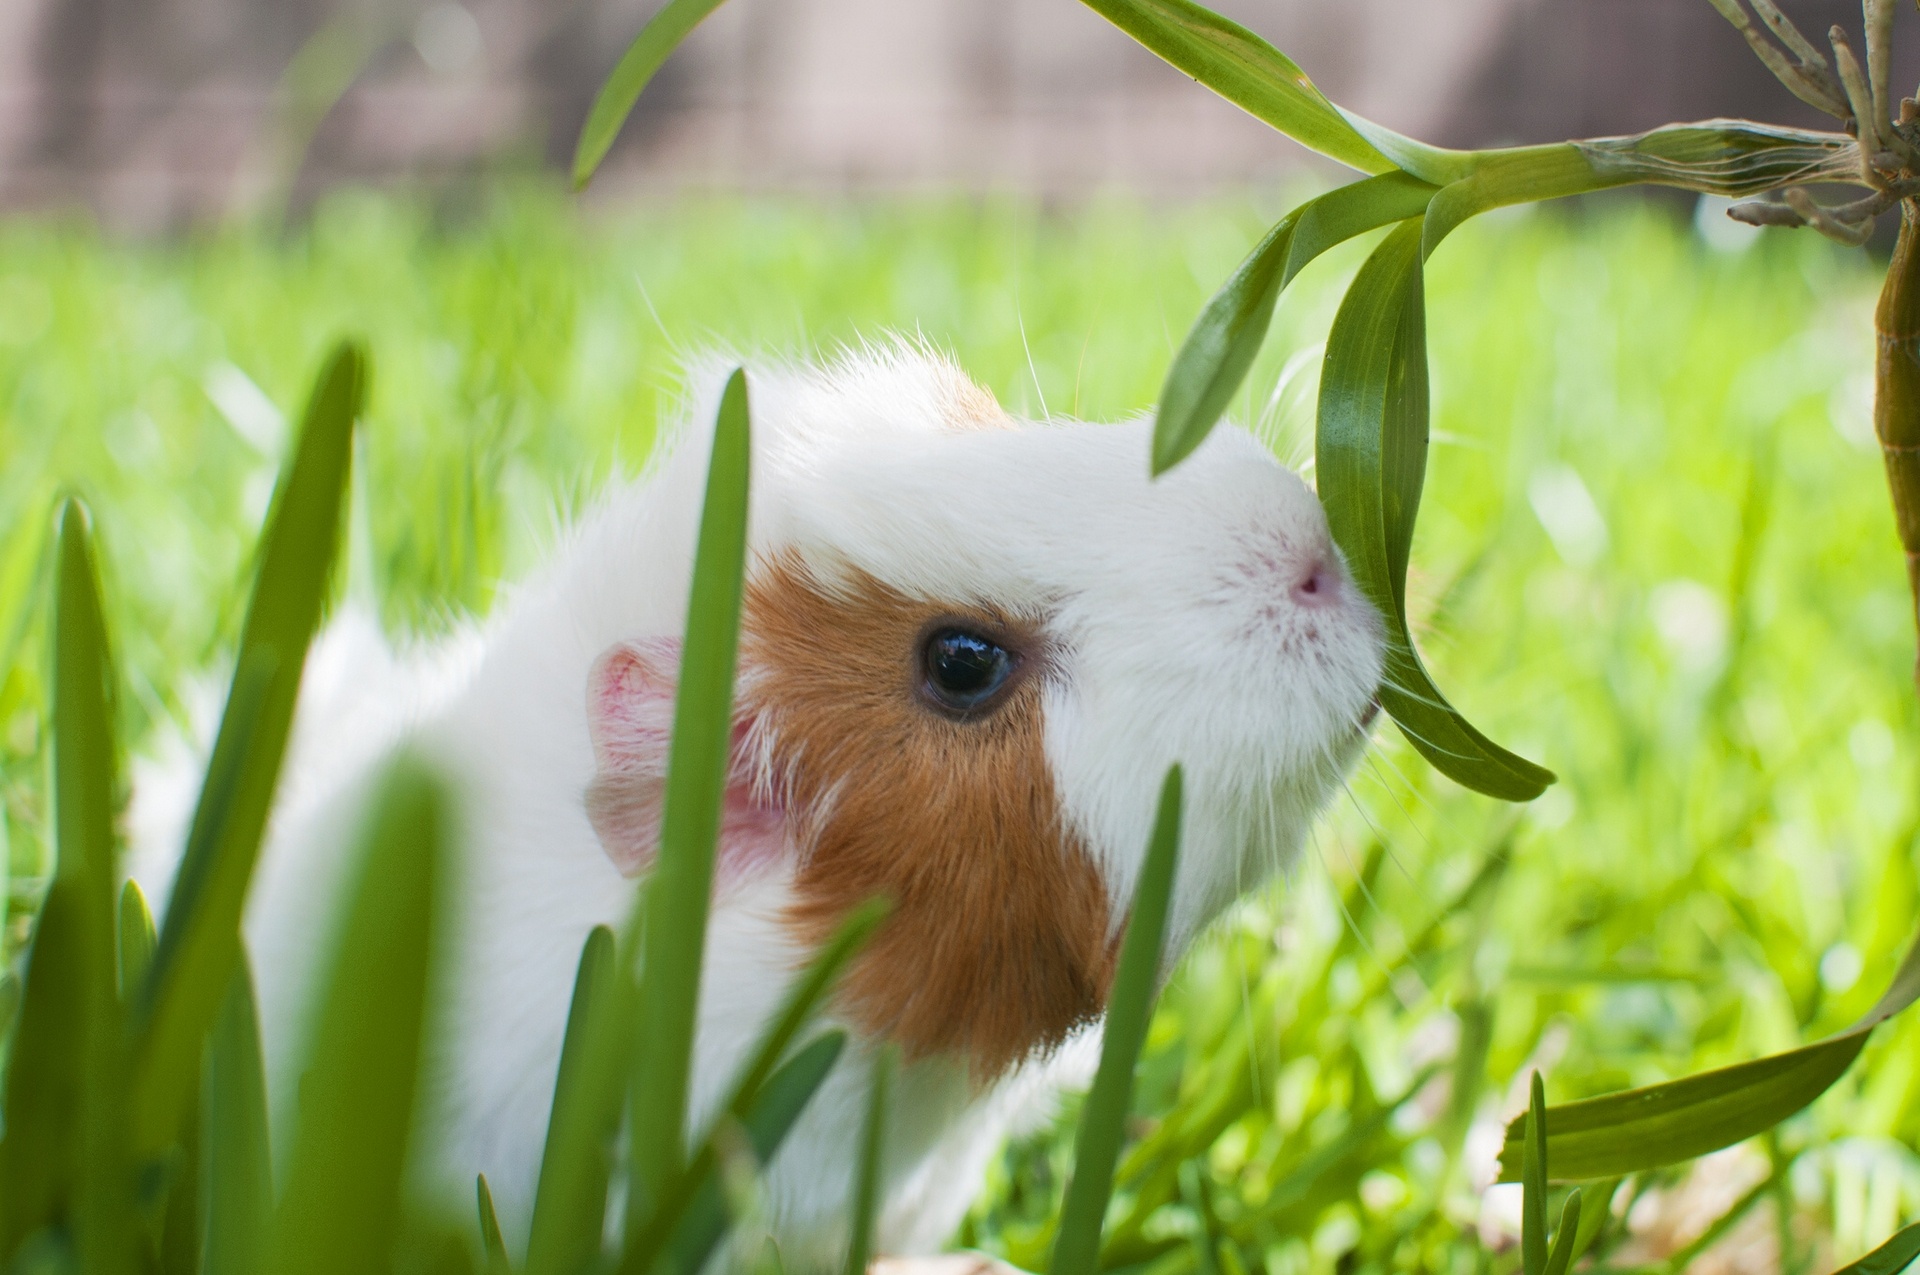 Guinea Pigs Wallpapers